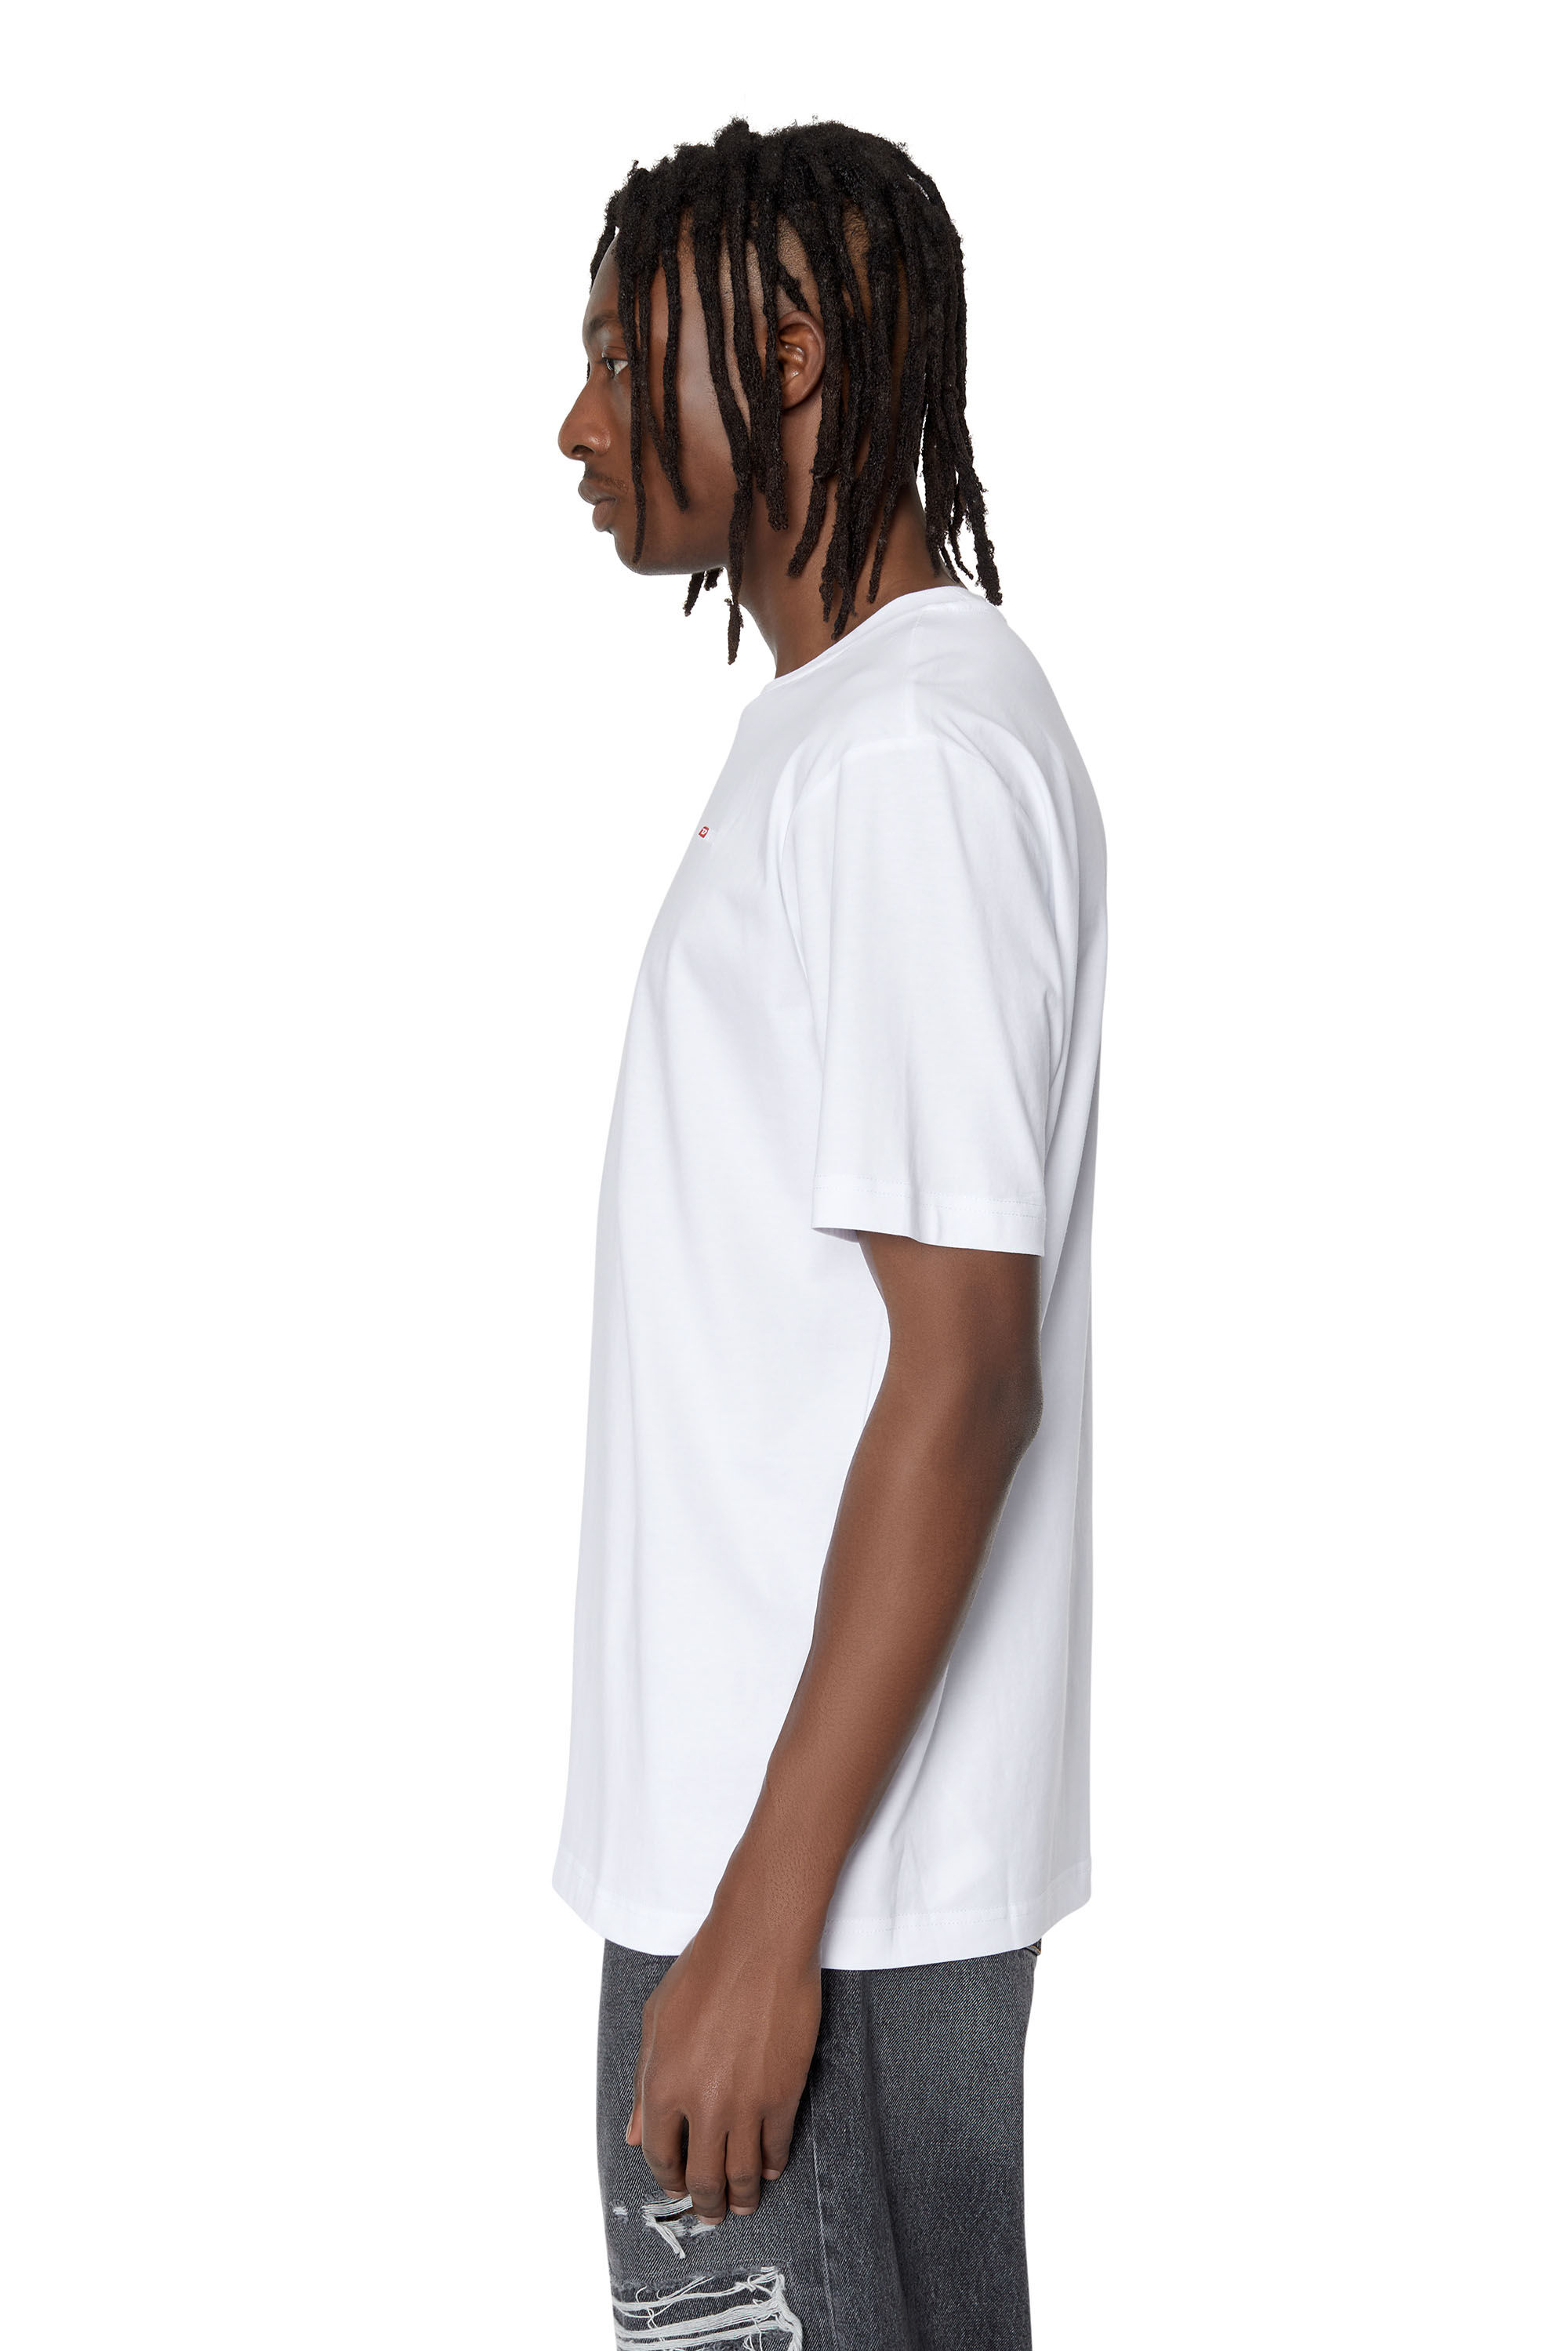 T-JUST-MICRODIV Man: T-shirt with micro-embroidered logo | Diesel